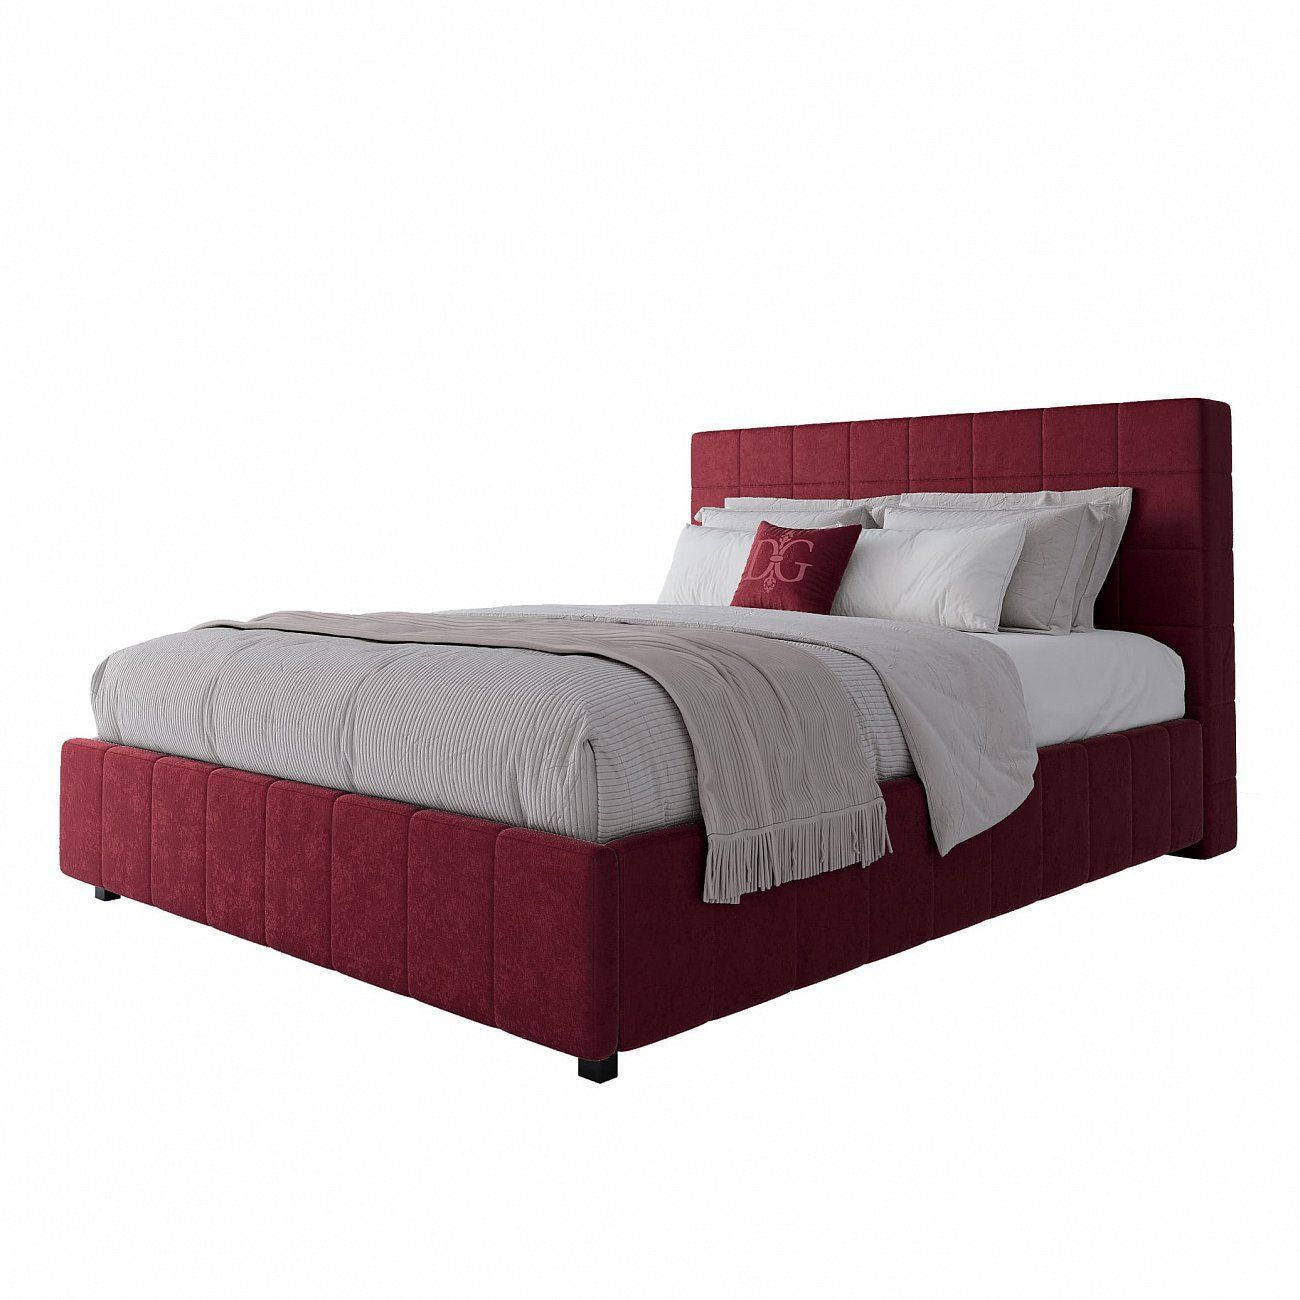 Double bed 160x200 cm red Shining Modern